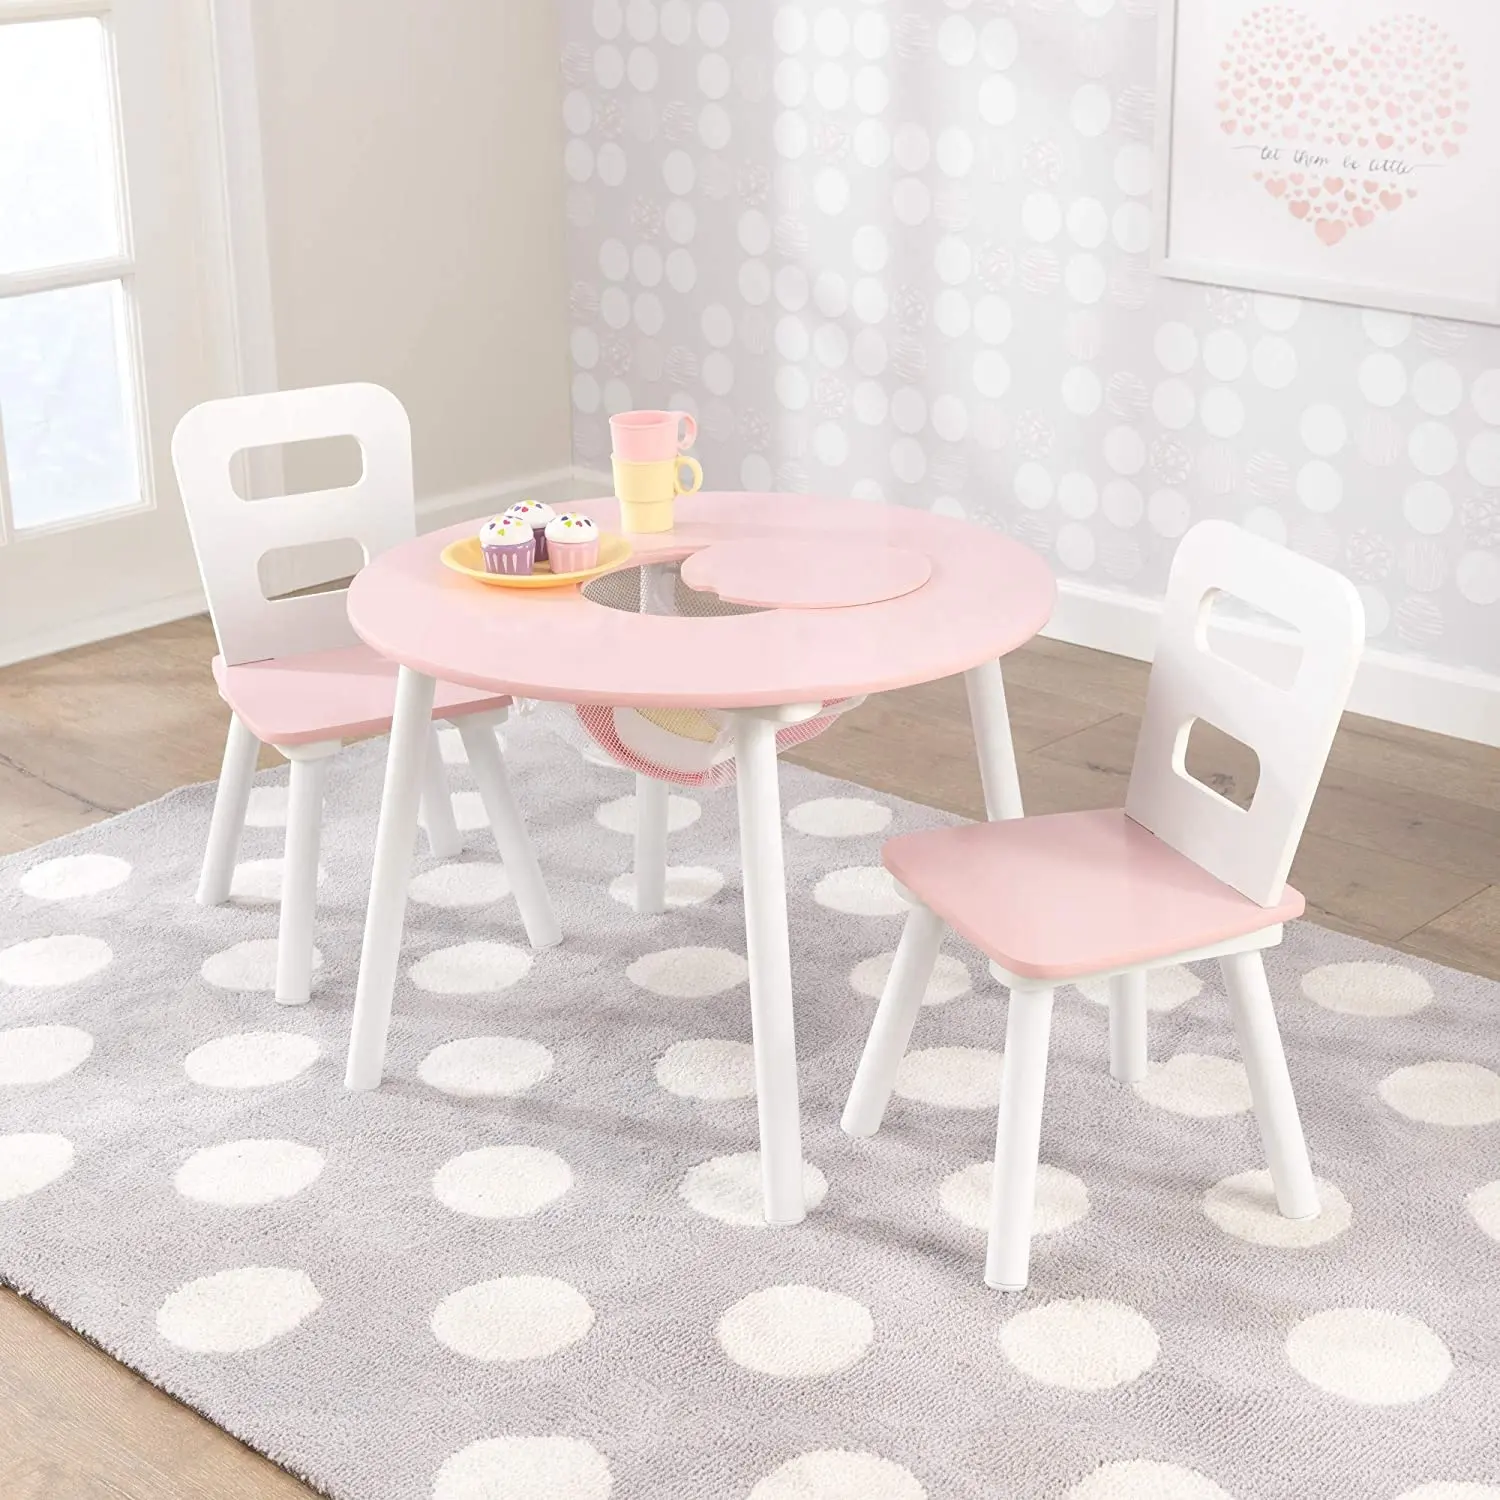 Wholesale ECO Cheap White Pink Wood Round Toddler Child Play Activity Kid Furniture Table and 2 Chair Set with storage mesh bag